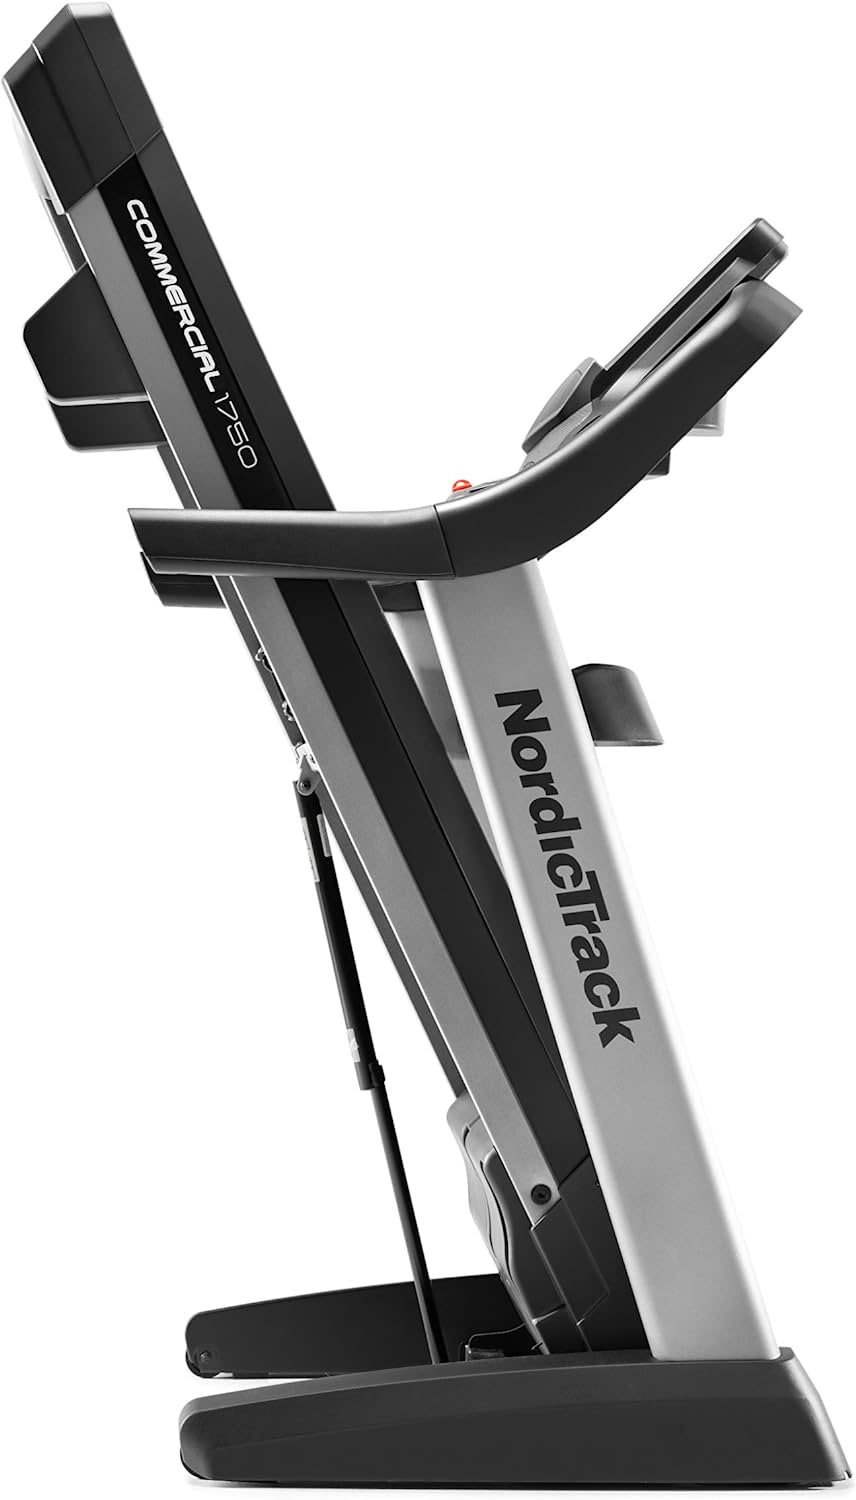 NordicTrack 1750 Treadmill Review